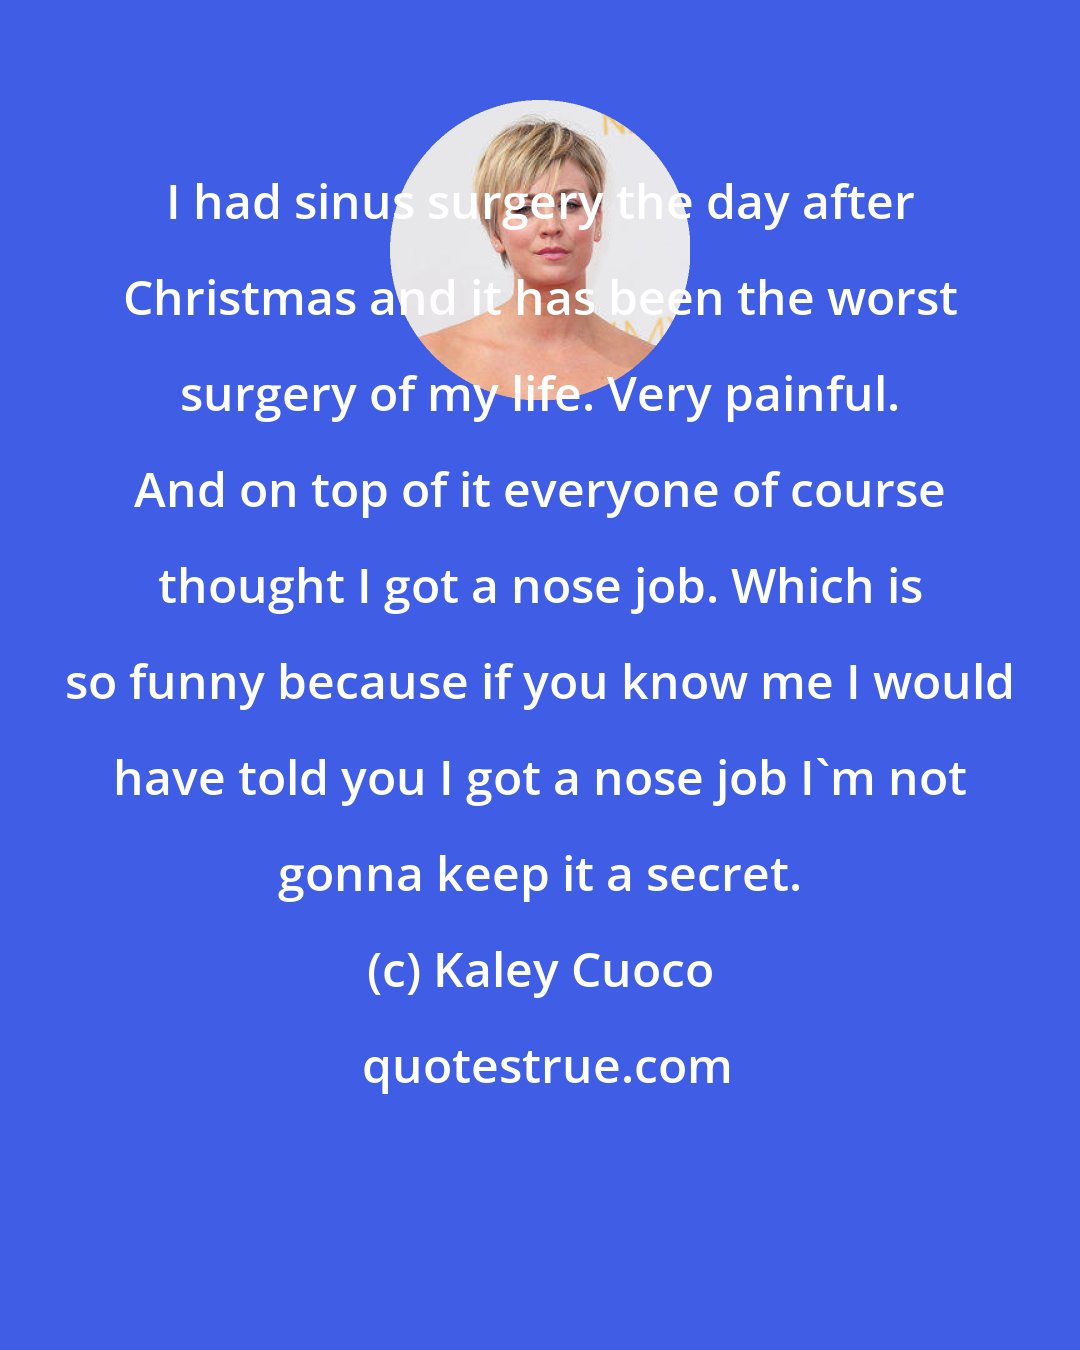 Kaley Cuoco: I had sinus surgery the day after Christmas and it has been the worst surgery of my life. Very painful. And on top of it everyone of course thought I got a nose job. Which is so funny because if you know me I would have told you I got a nose job I'm not gonna keep it a secret.